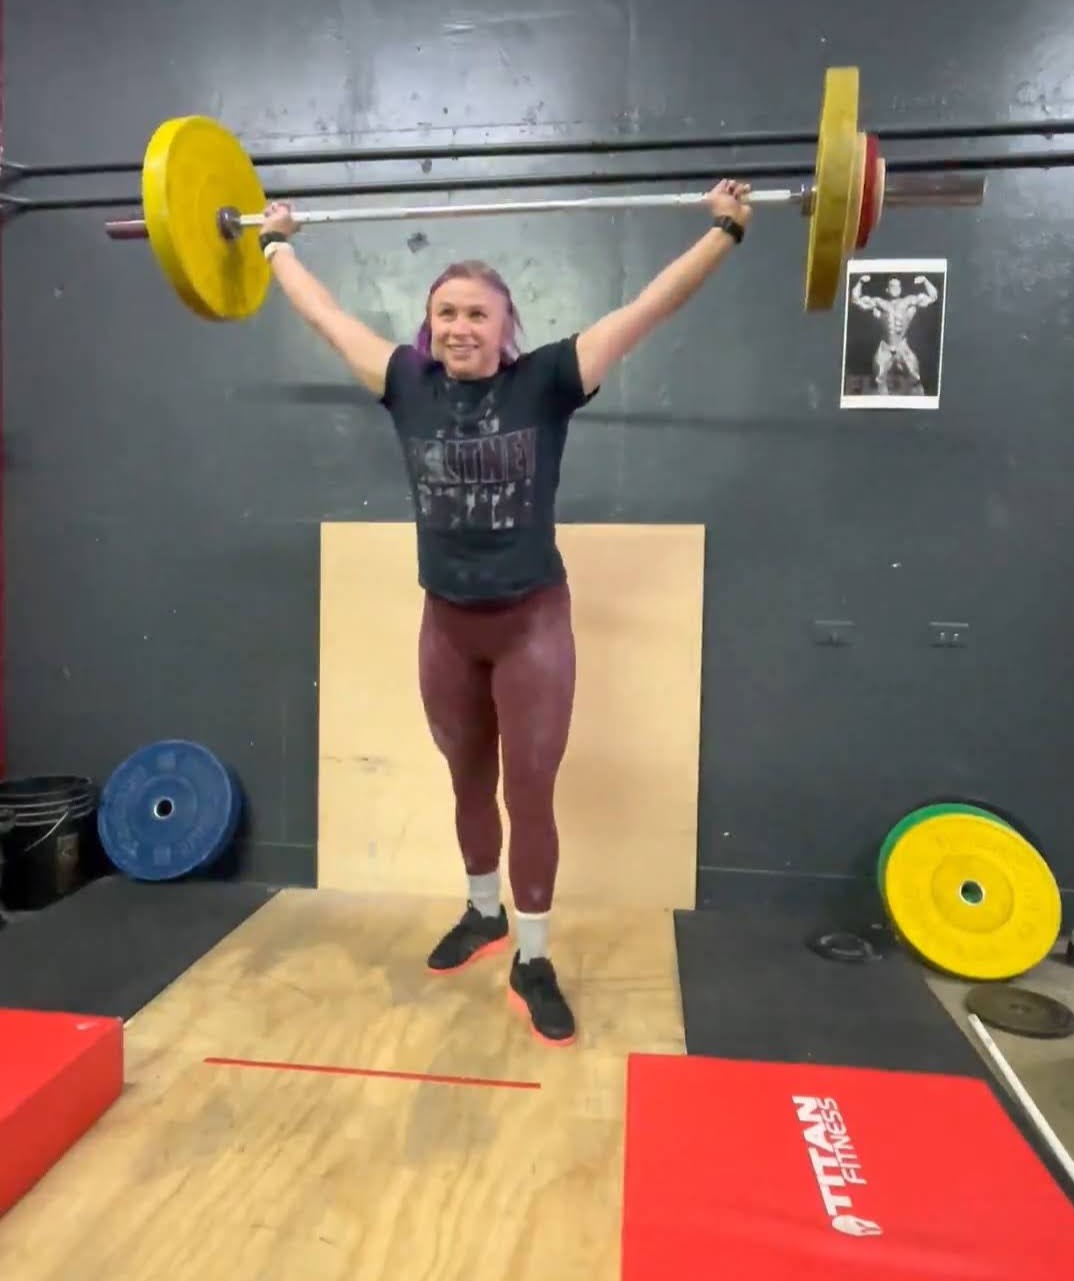 A potato-quality image of me extremely happy after a hard-earned snatch PR. My shirt says, &ldquo;It&rsquo;s Britney, b*tch,&rdquo; which I wore to celebrate Britney Spears&rsquo; then recent release from her conservatorship. I love the juxtaposition here: cheering the newfound freedom of a beloved celebrity of my childhood — another victim of early-to-mid-aughts culture — and a visual depiction of the mental freedom I found in the sport of olympic weightlifting.